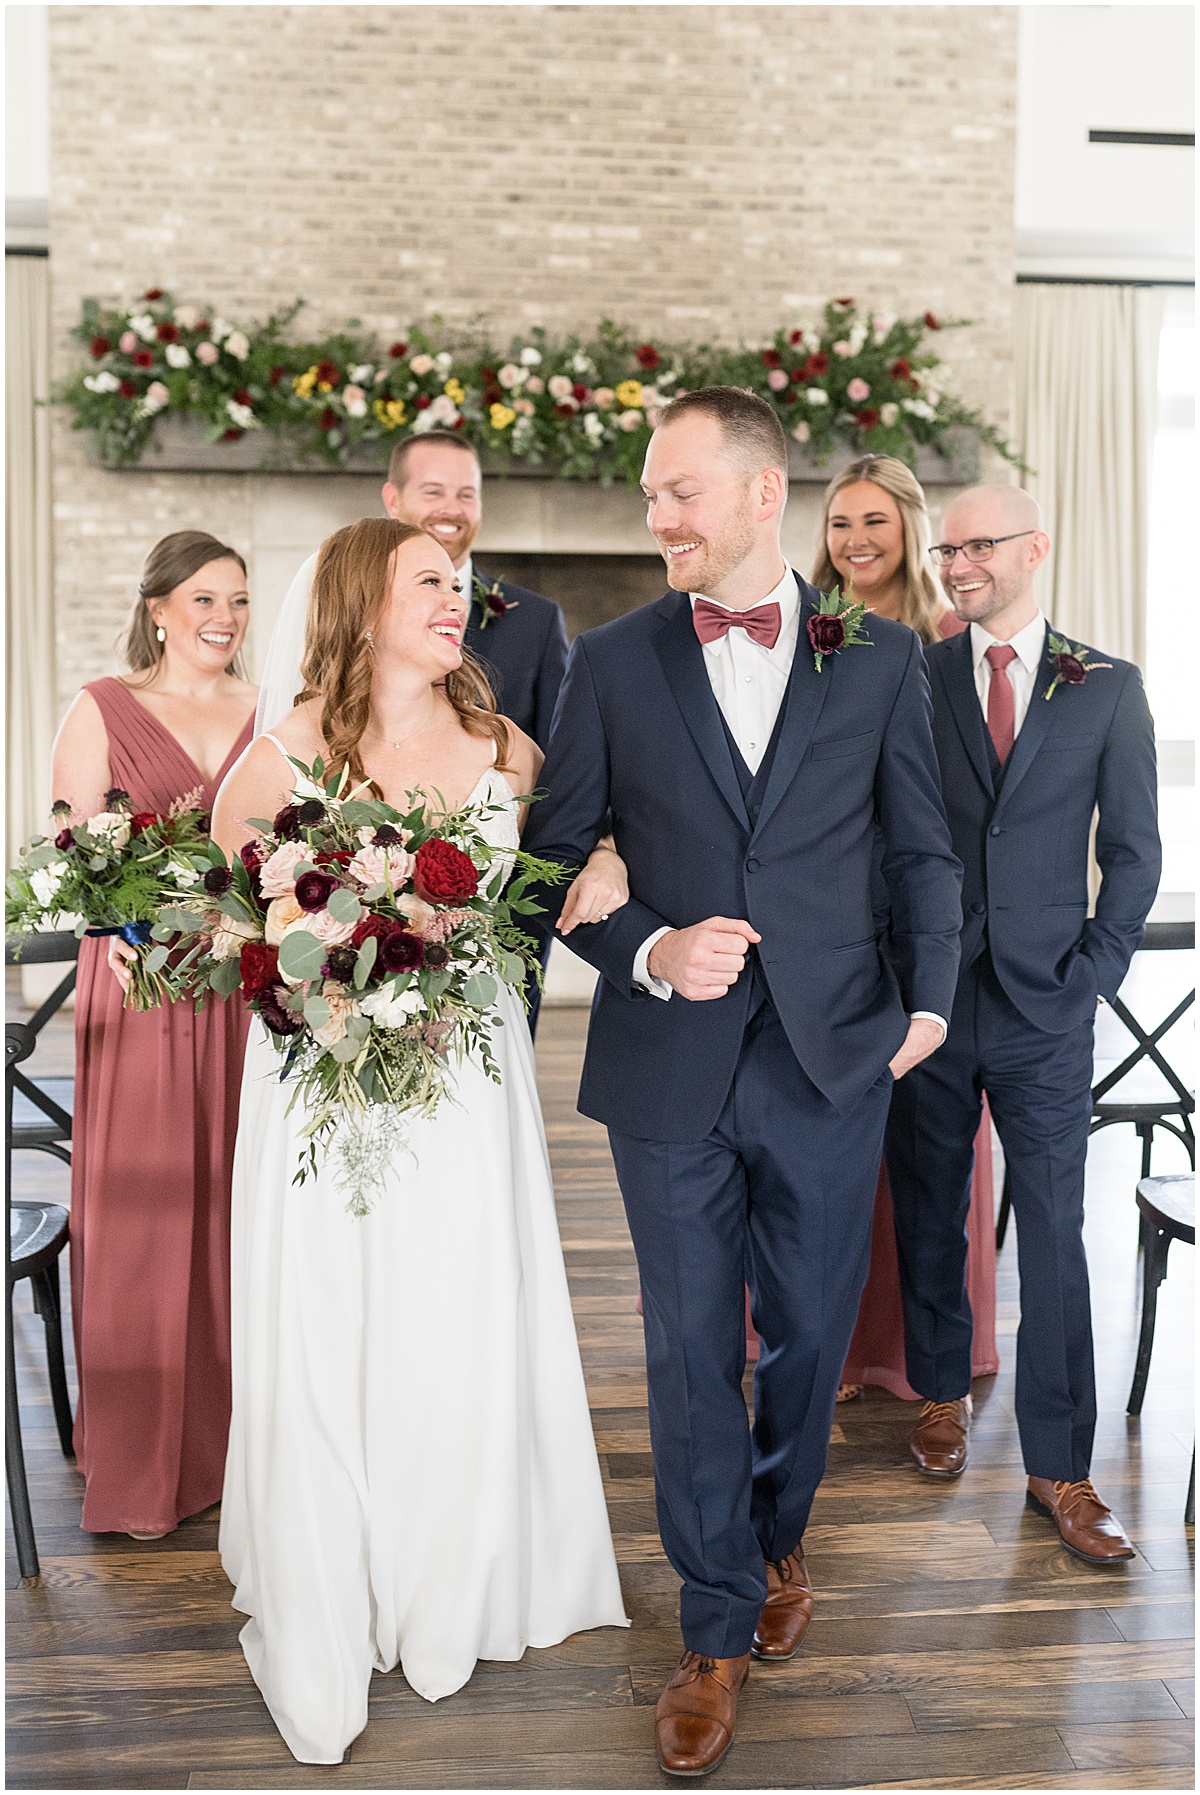 Bride and groom locking arms at Iron & Ember events wedding in Carmel, Indiana